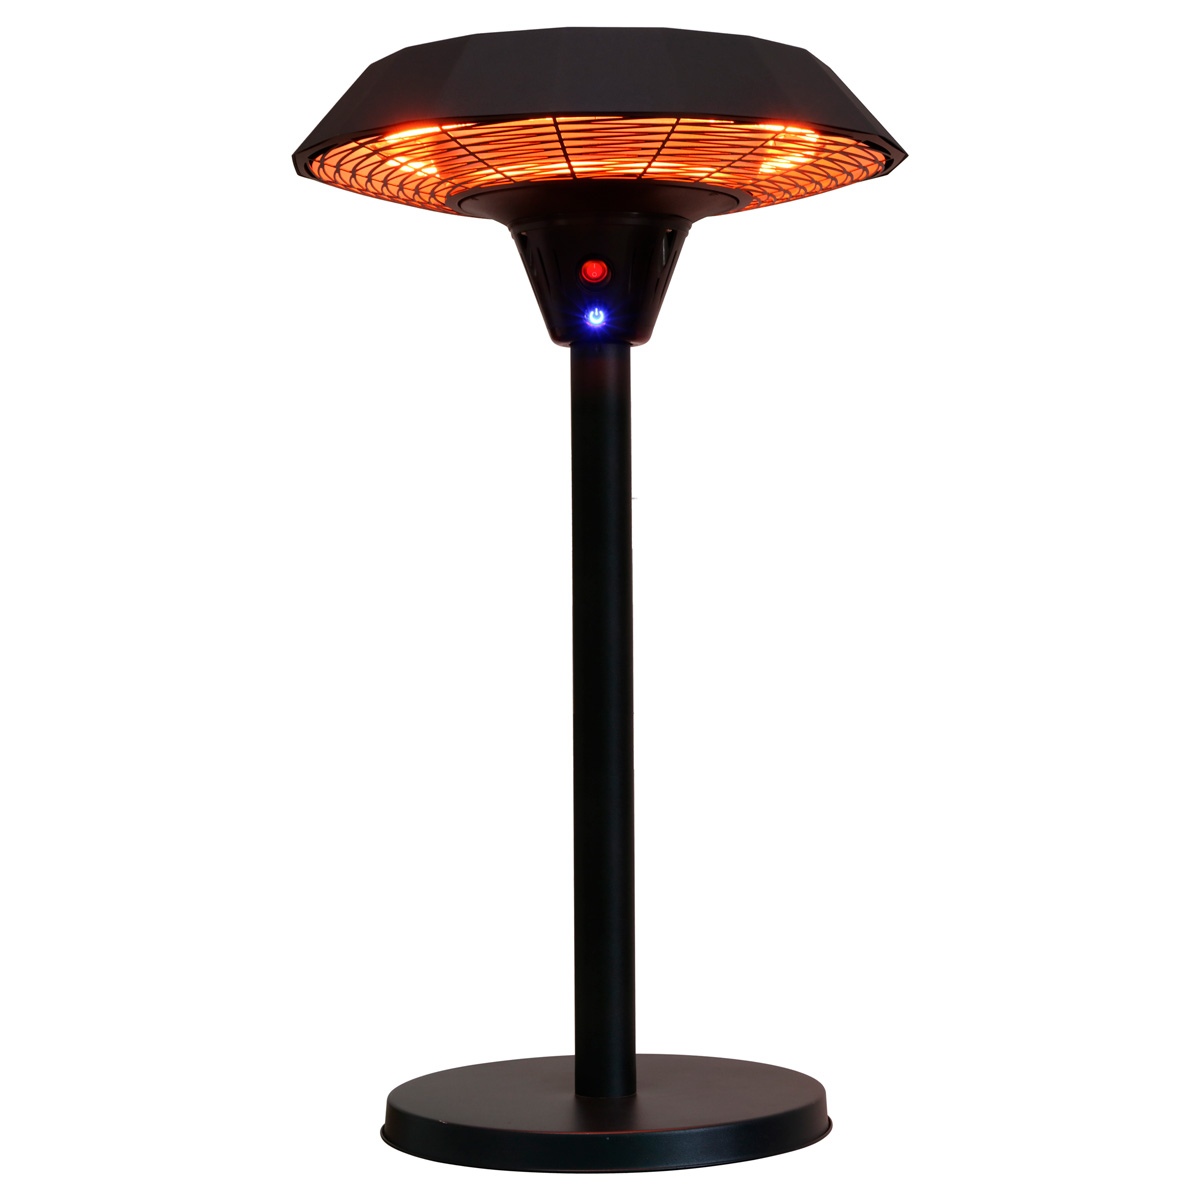 Details About Charles Bentley Electric Table Top Patio Heater 2000 W 240 V in sizing 1200 X 1200